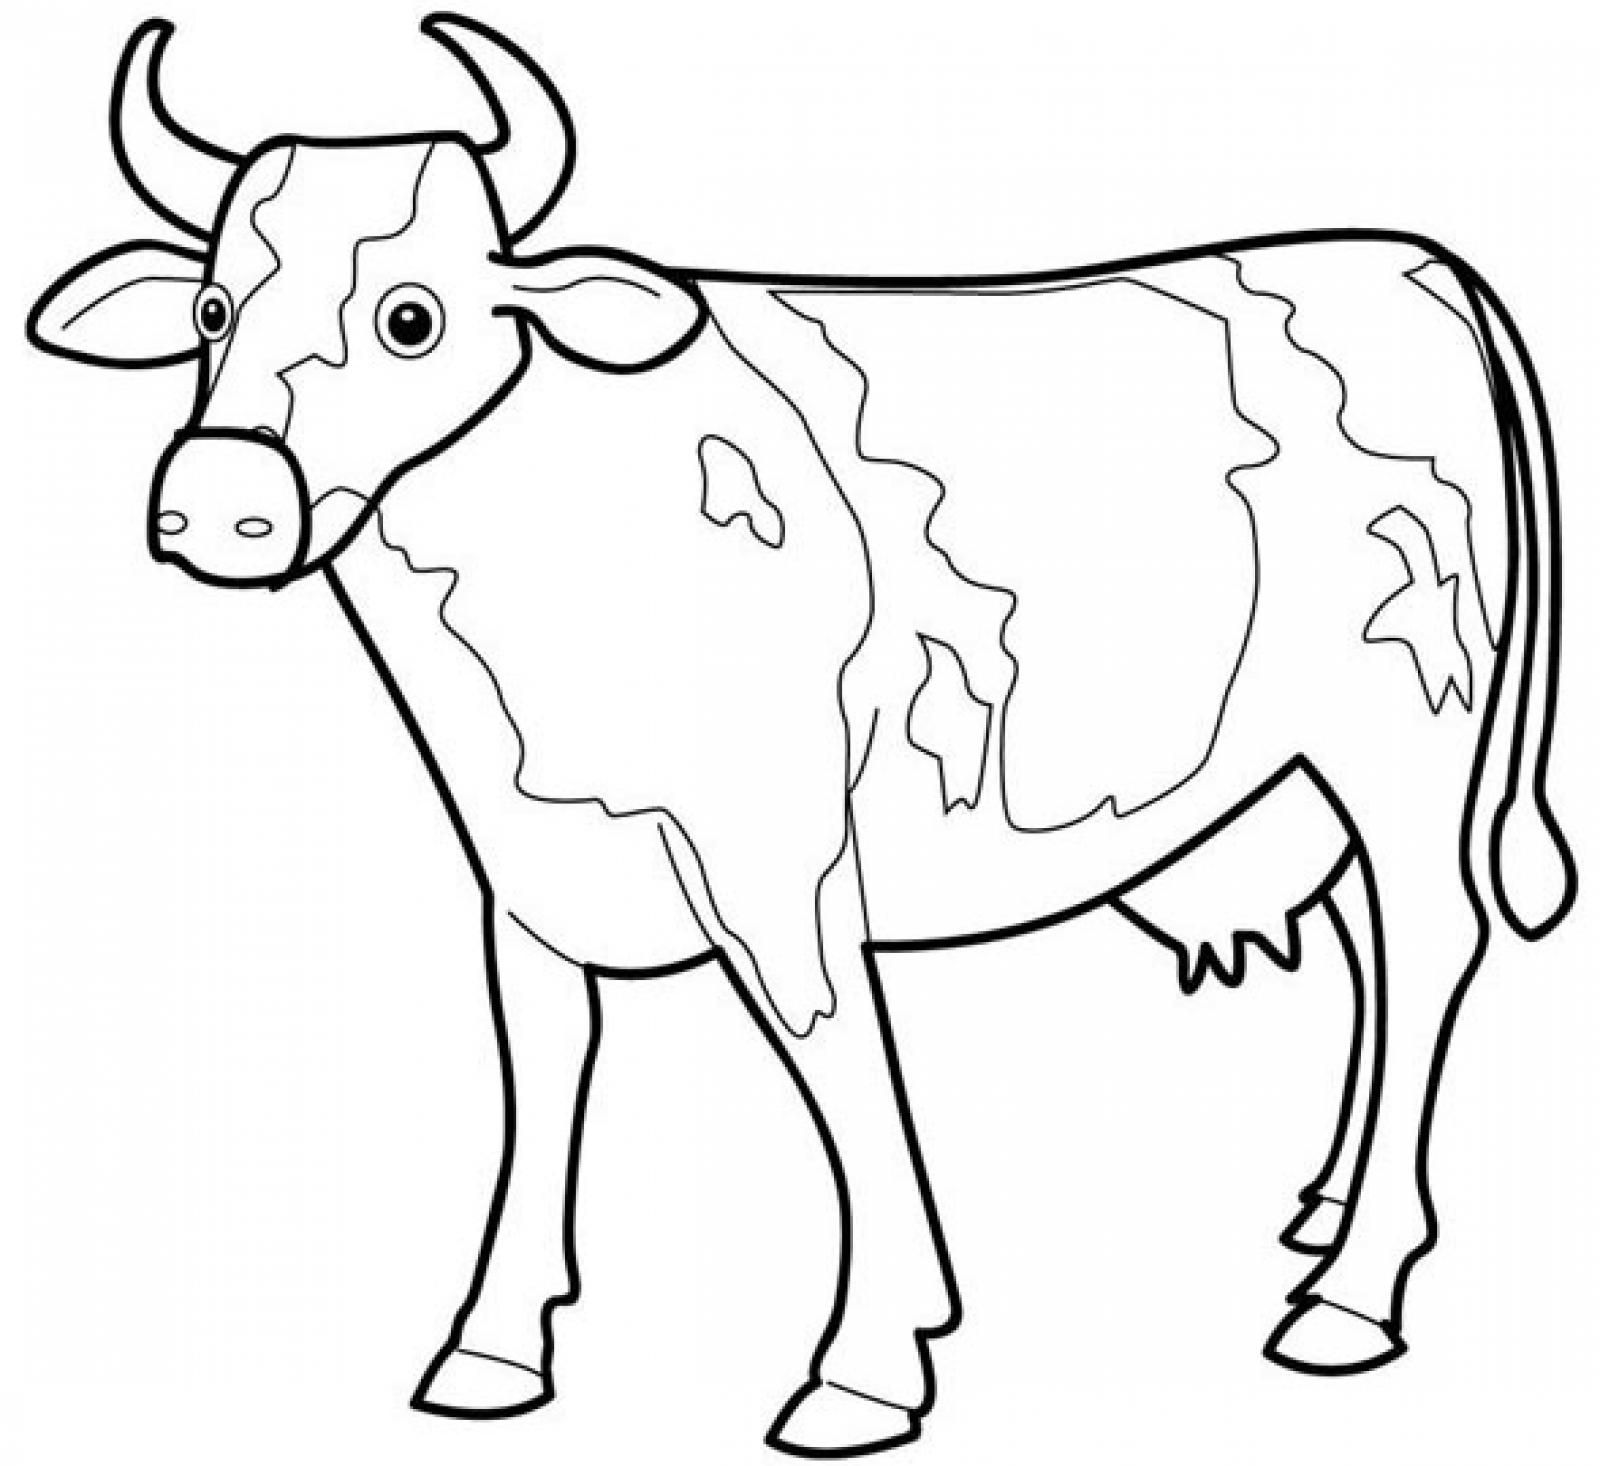 Cow Printable Coloring Pages - Coloring Home